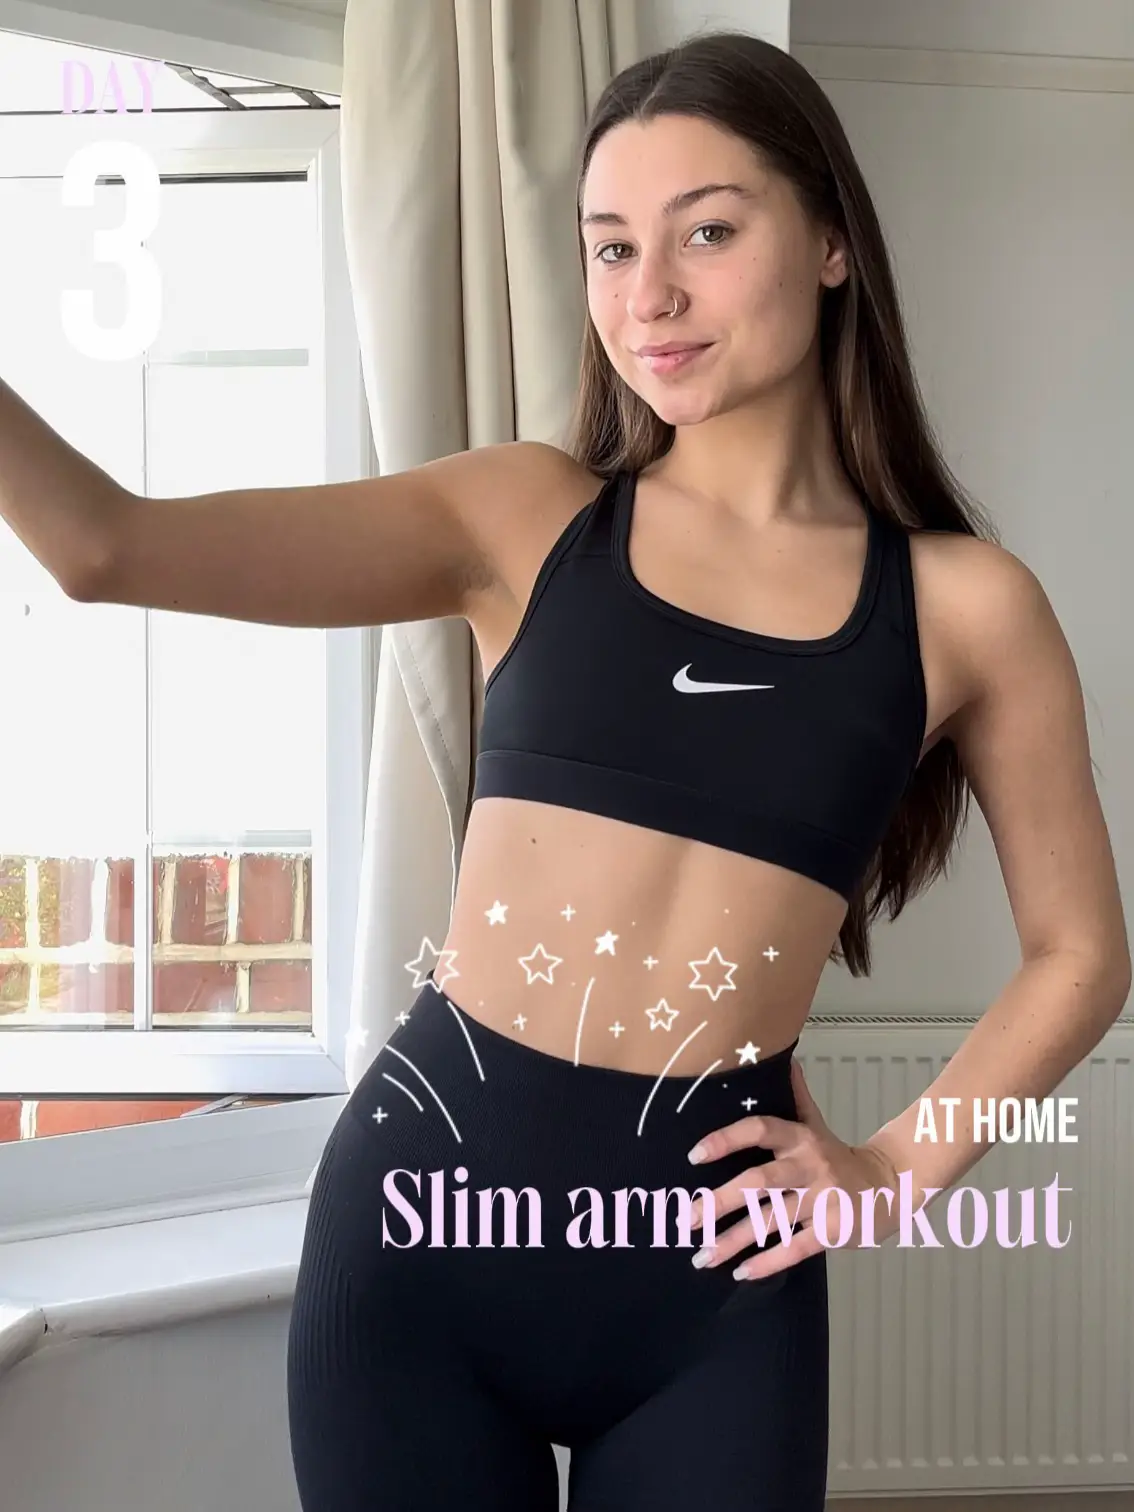 At home arm workout 🏋️‍♀️